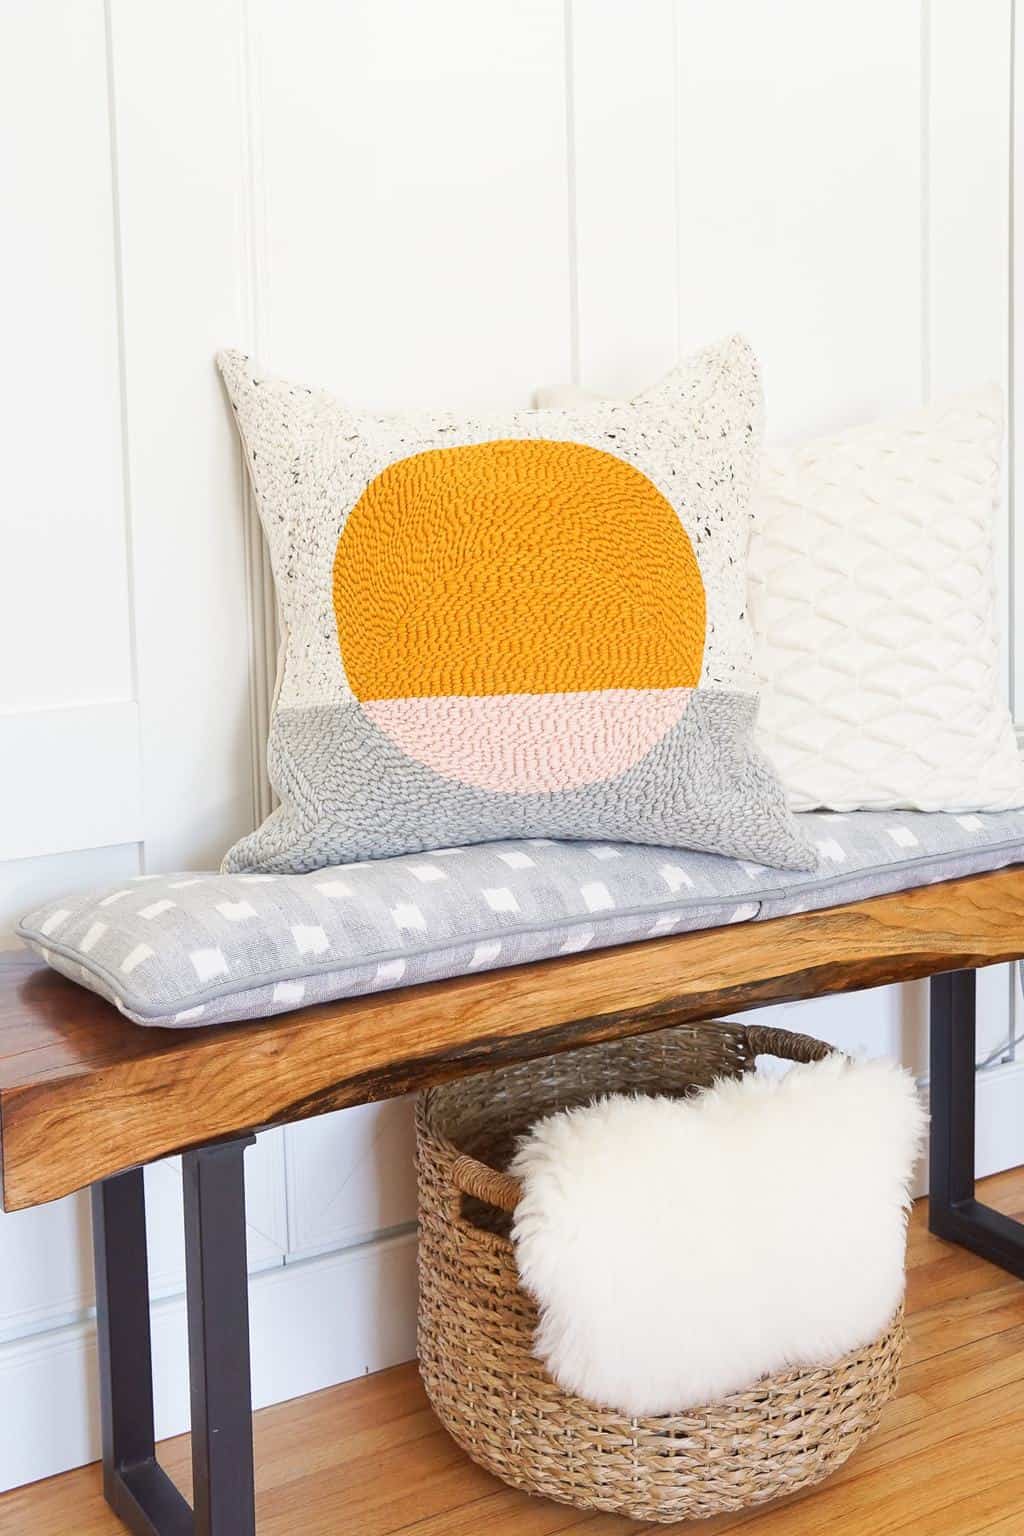 DIY Rug Hook Pillow by top Houston lifestyle blogger Ashley Rose of Sugar and Cloth